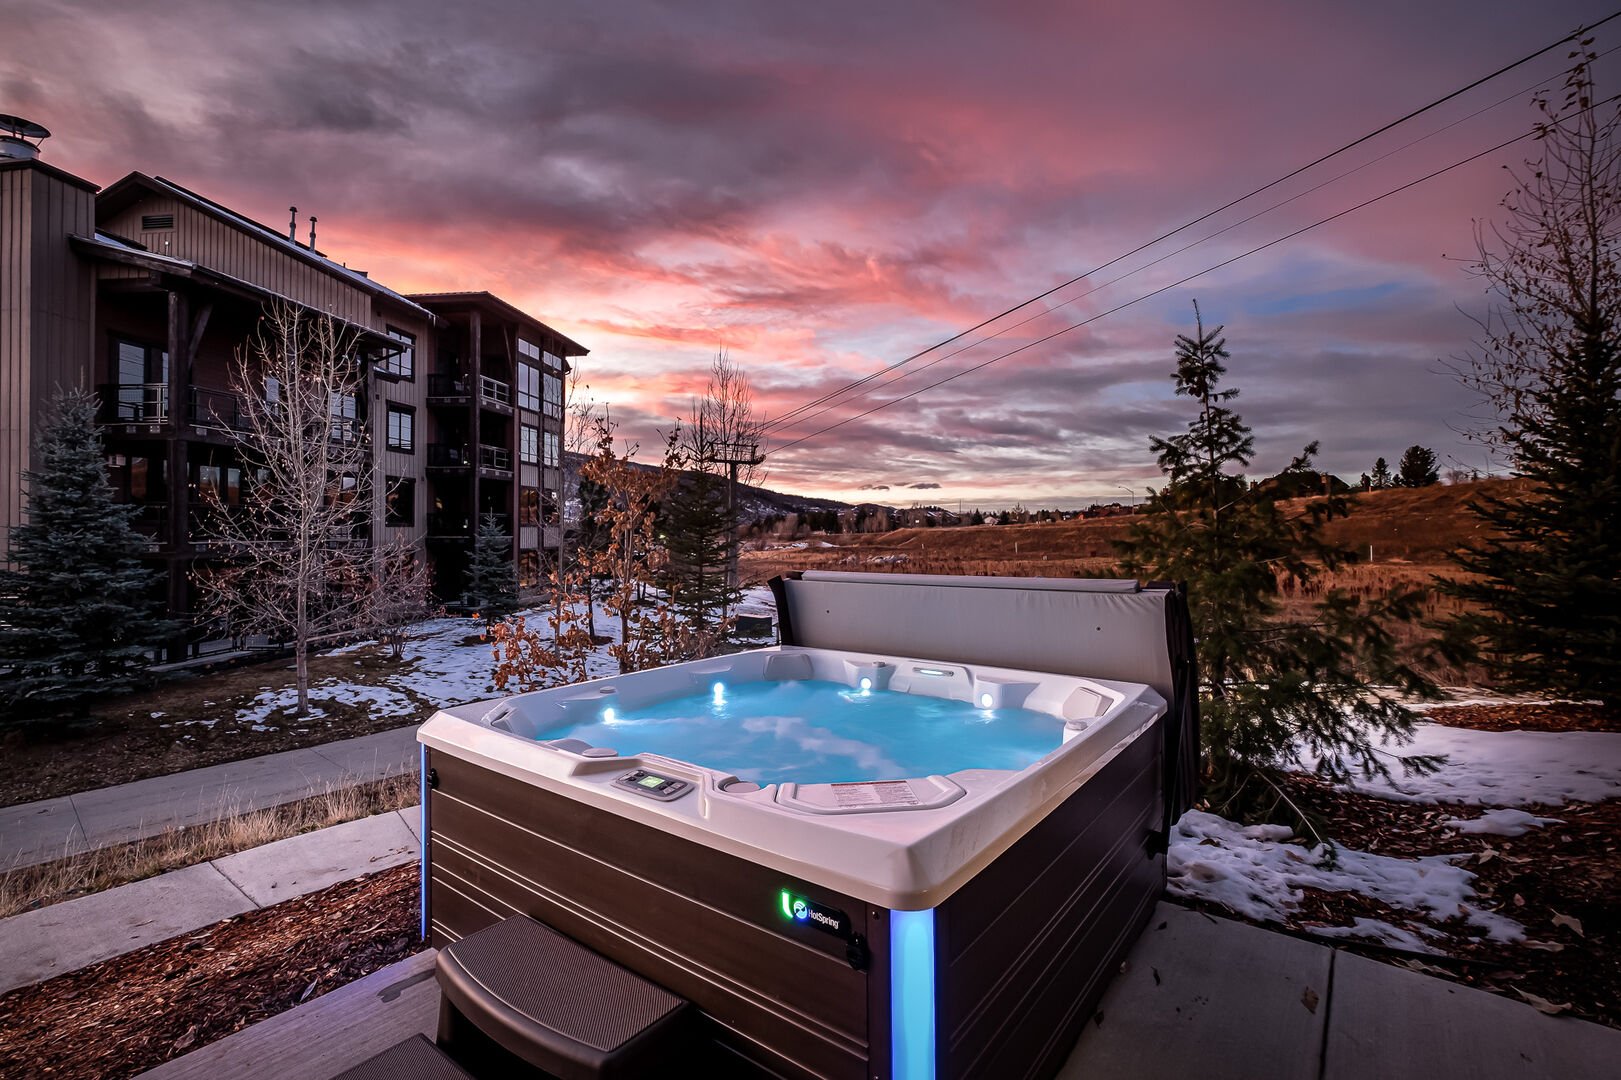 Star gaze at night in your own private hot tub.